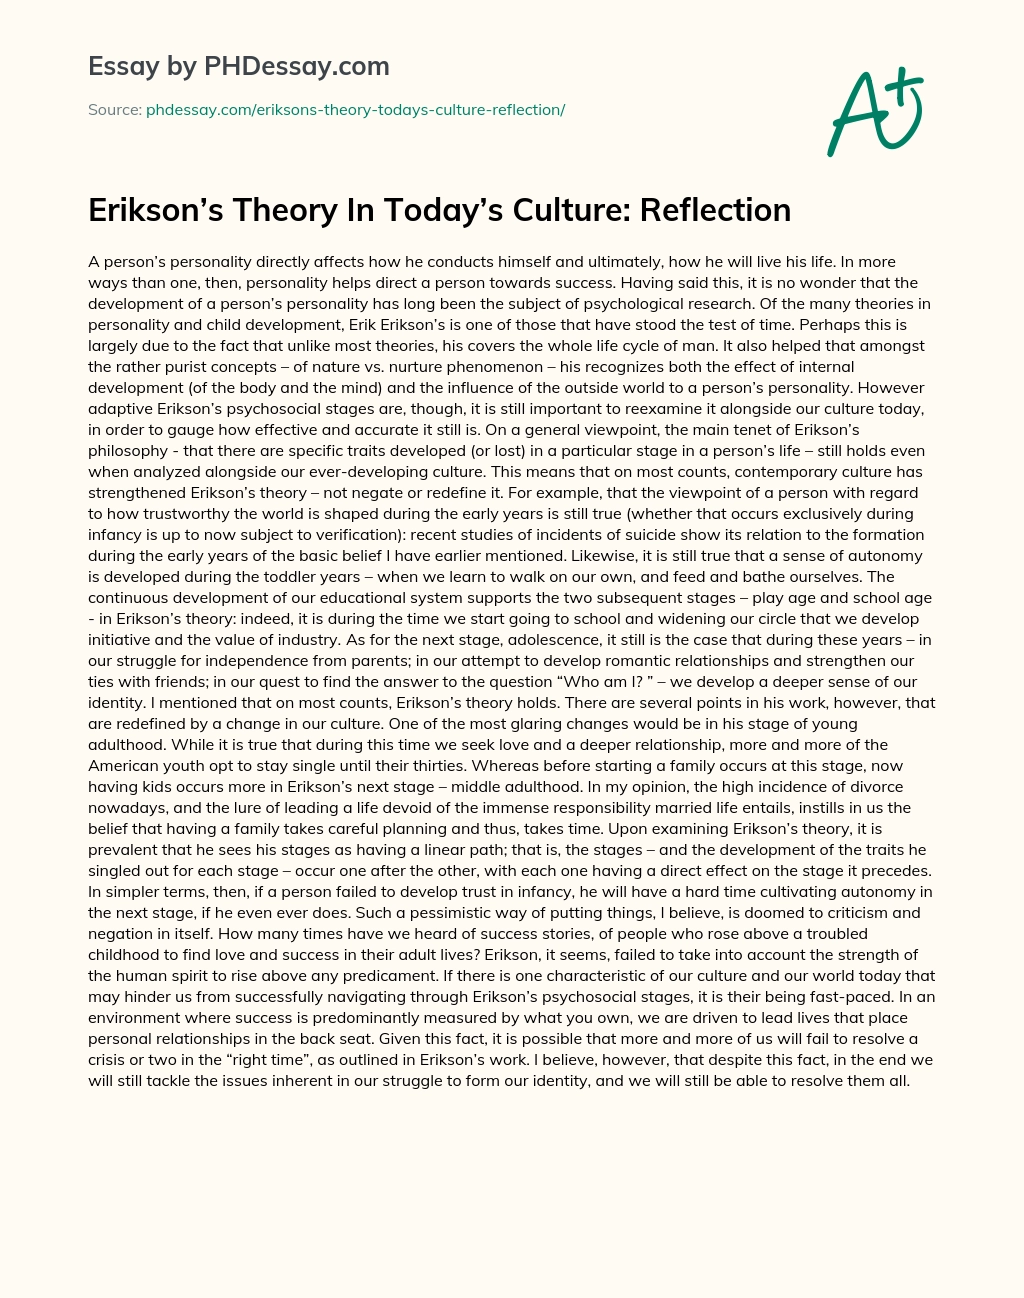 Erikson’s Theory In Today’s Culture: Reflection essay